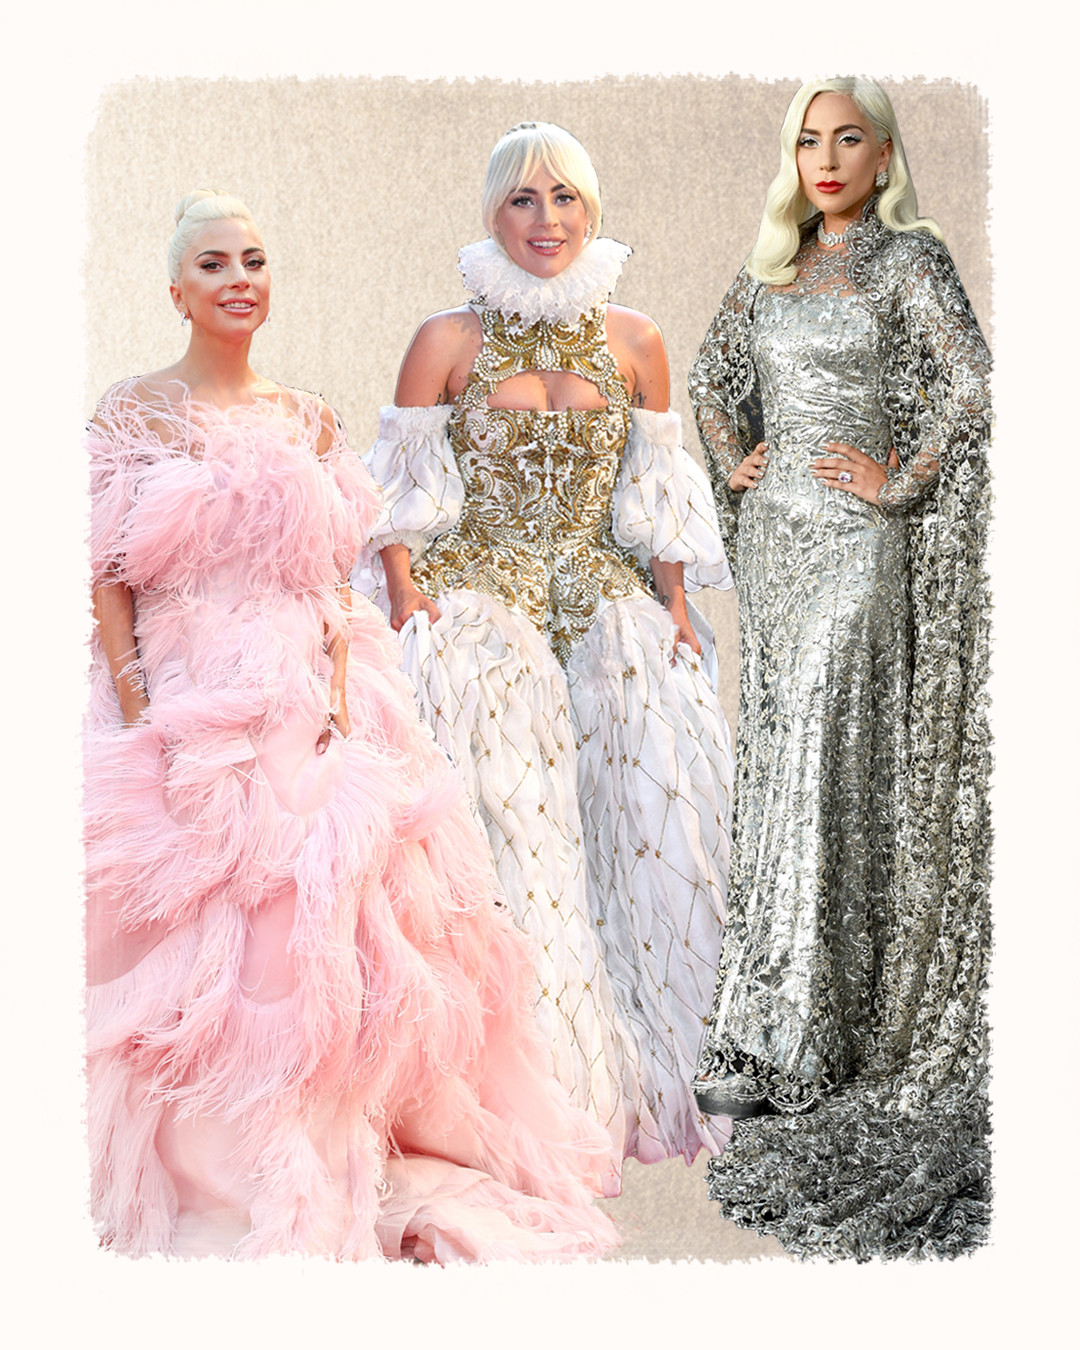 Lady Gaga S Crazy Epic Looks From The A Star Is Born Press Tour E Online Ap